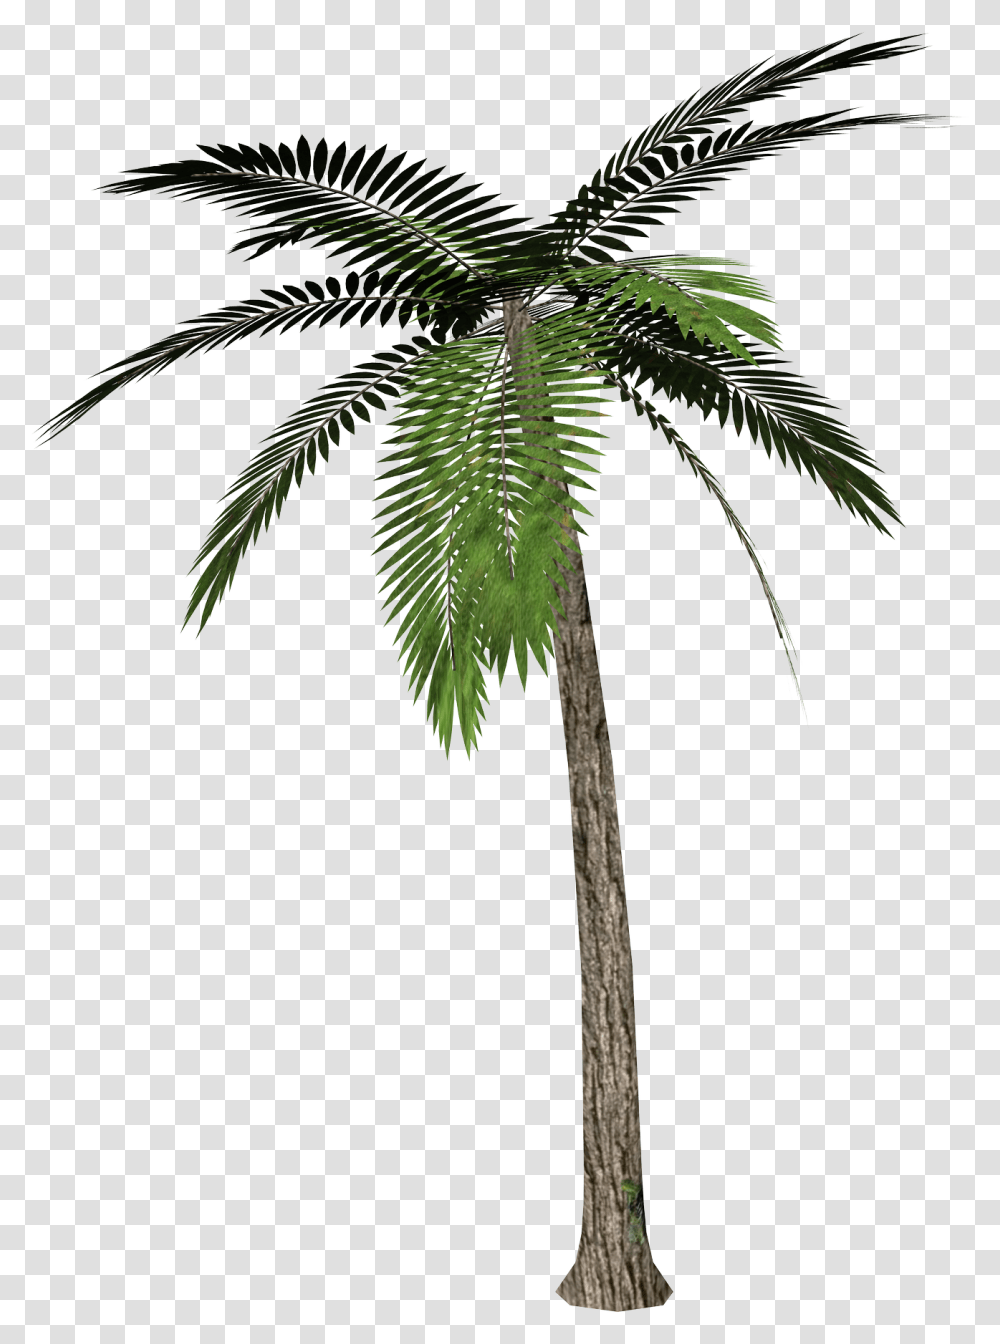 Palm Tree Images Download Free Palm Tree Background, Plant, Arecaceae, Bird, Animal Transparent Png